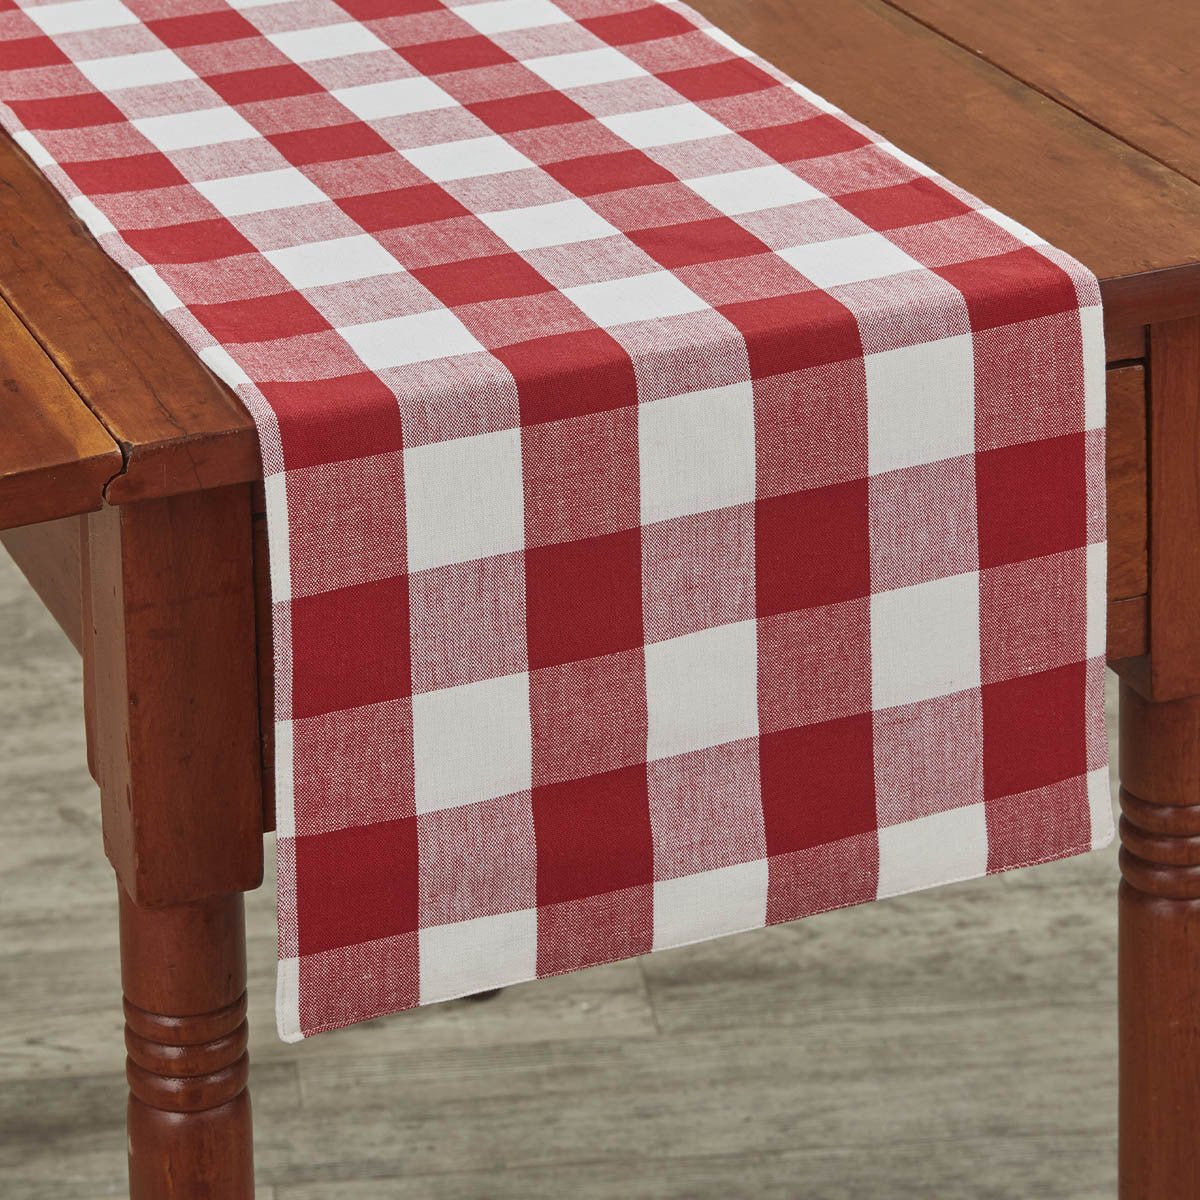 Wicklow Check Backed Table Runner  - Red & Cream Park Designs